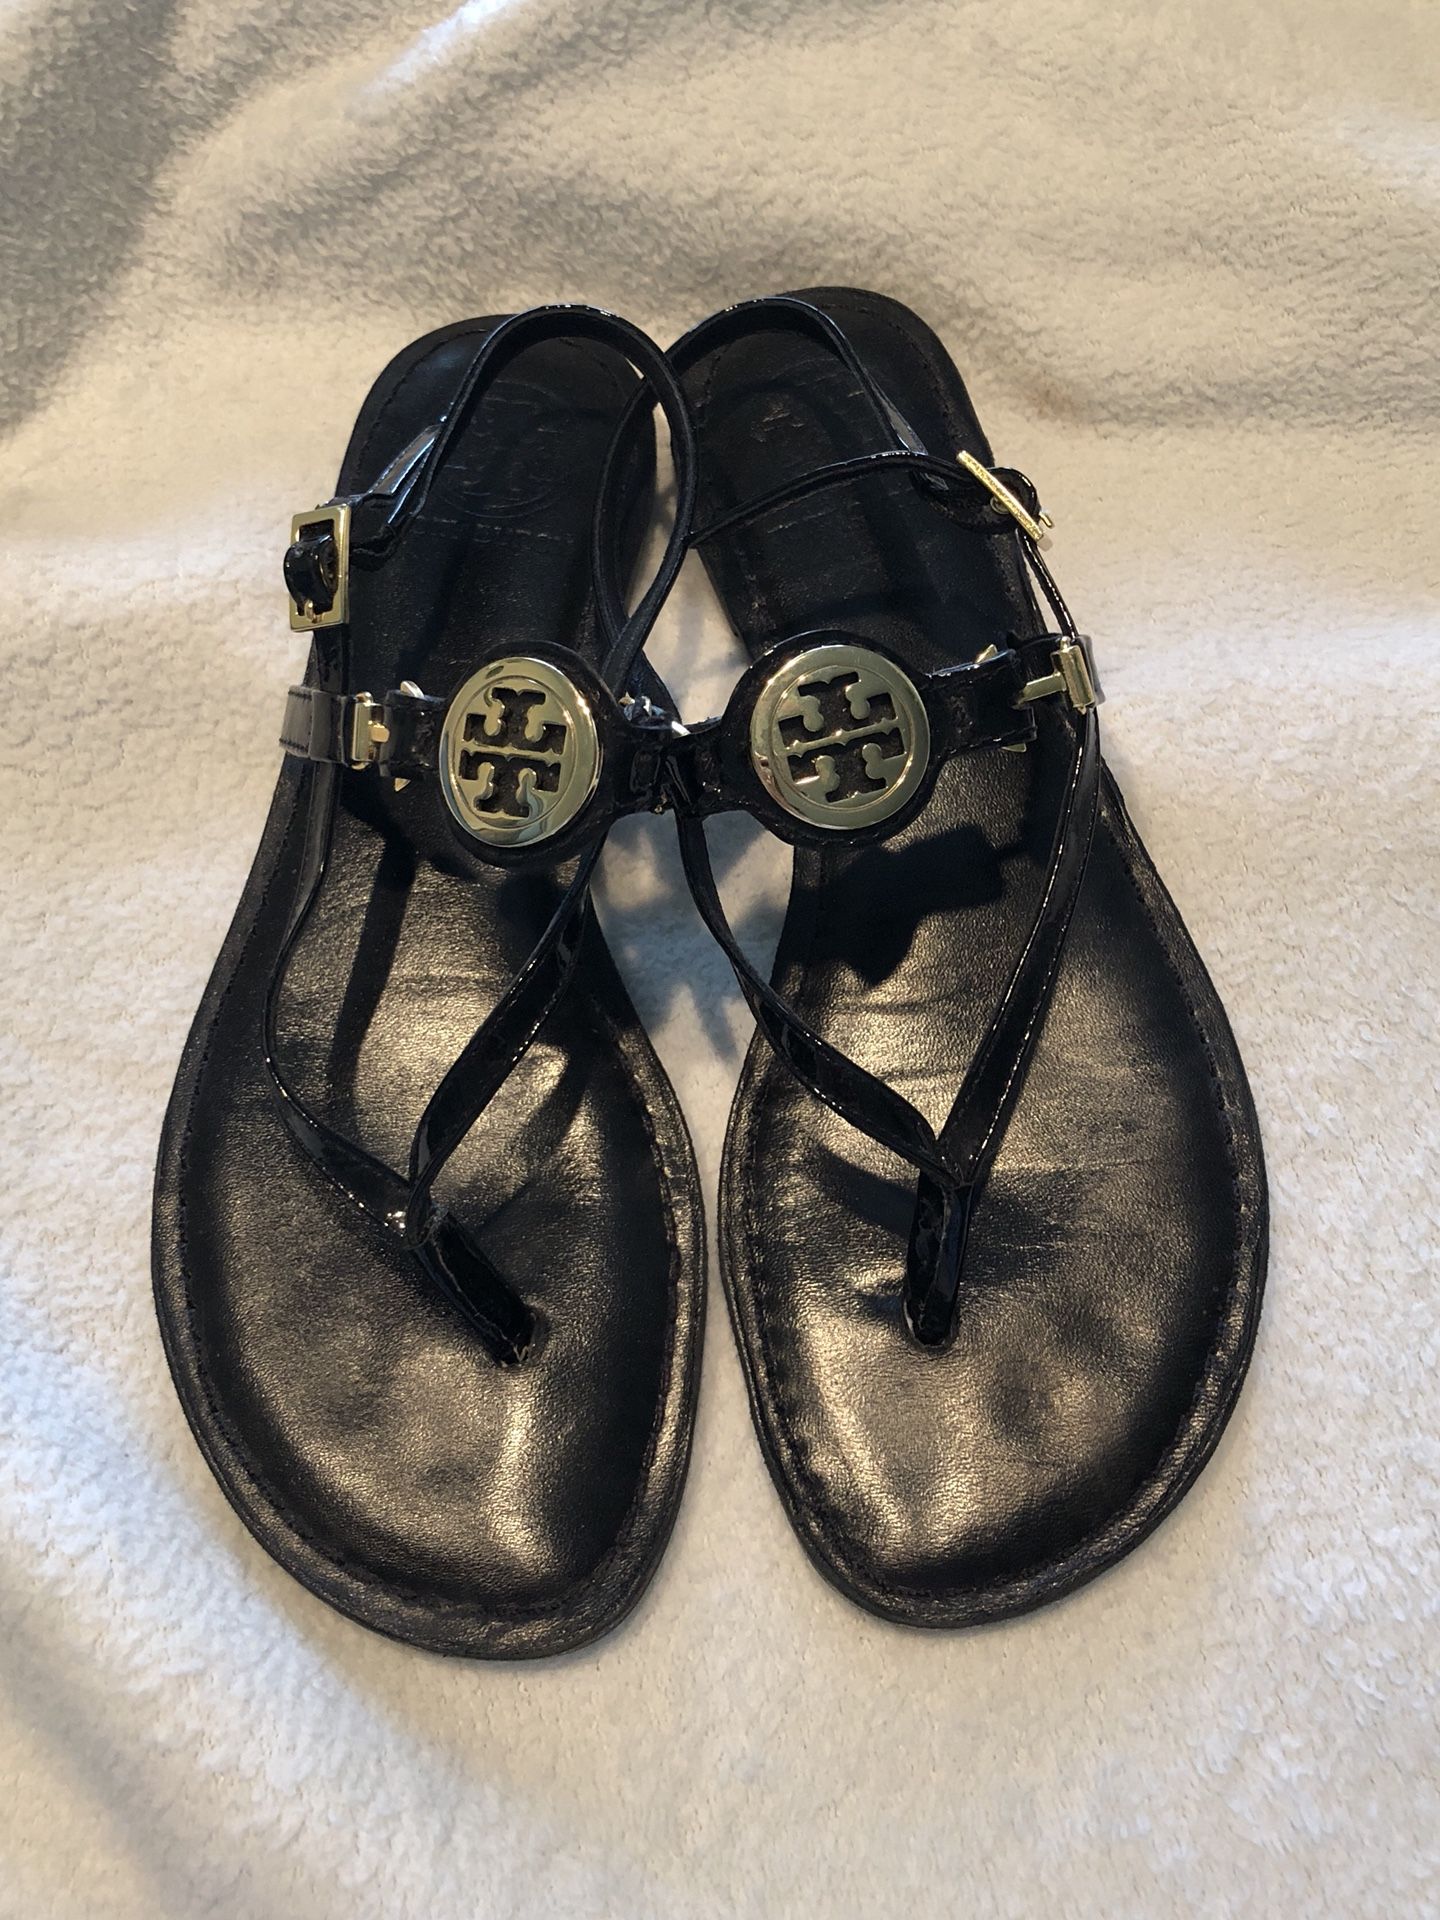 Tory Burch Sandals for Sale in San Antonio, TX - OfferUp